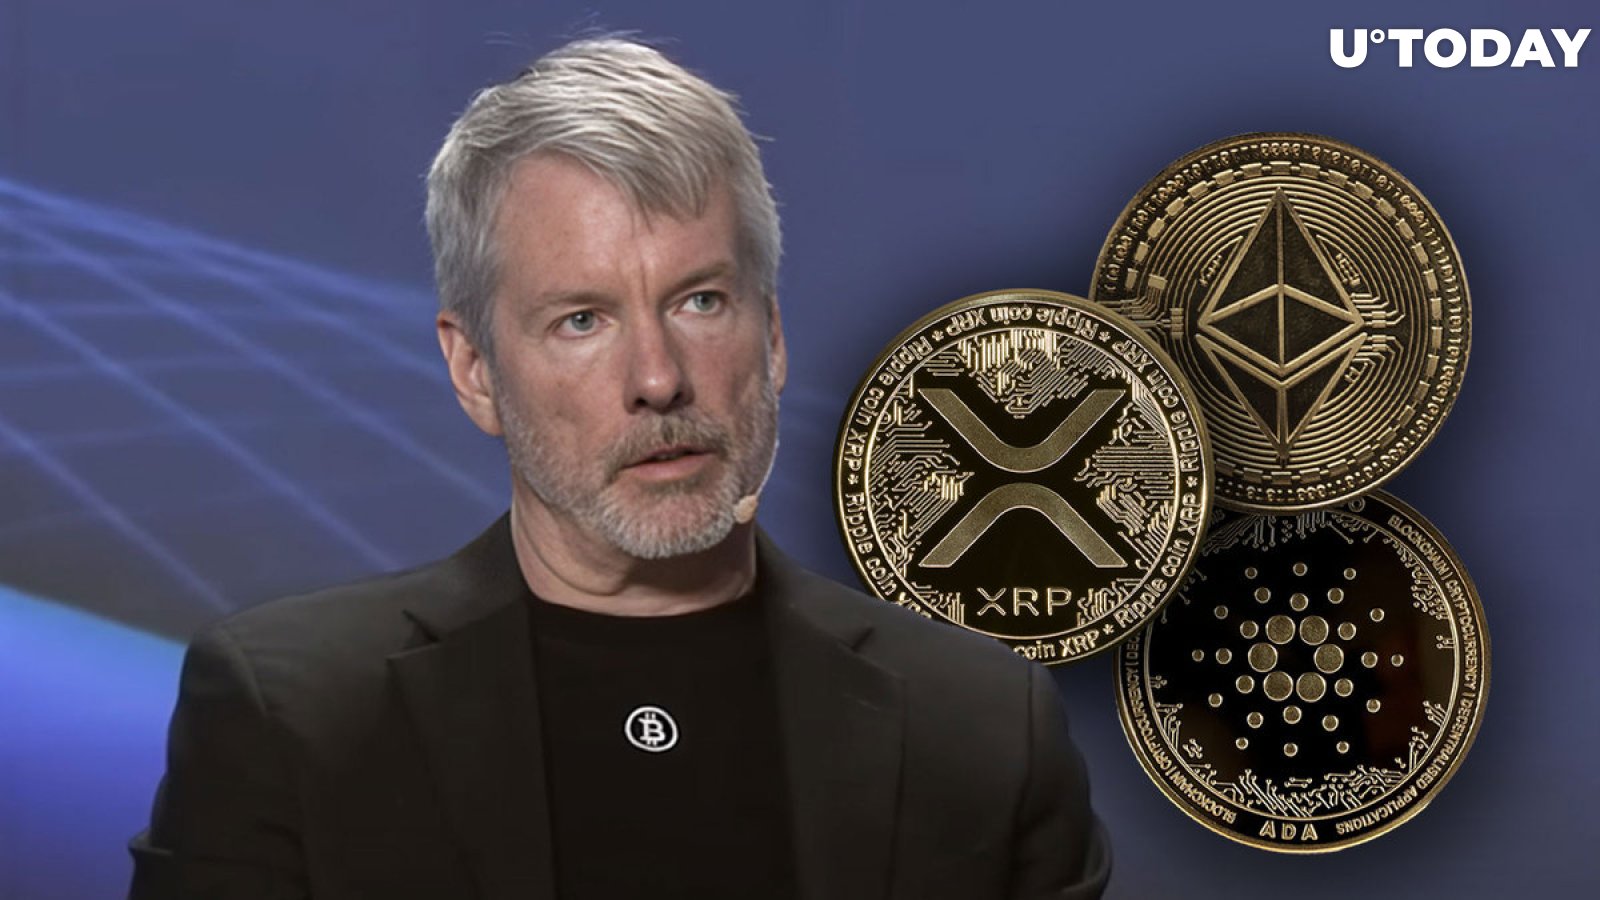 Did Michael Saylor Just Label Cryptocurrencies ETH, XRP, and ADA?